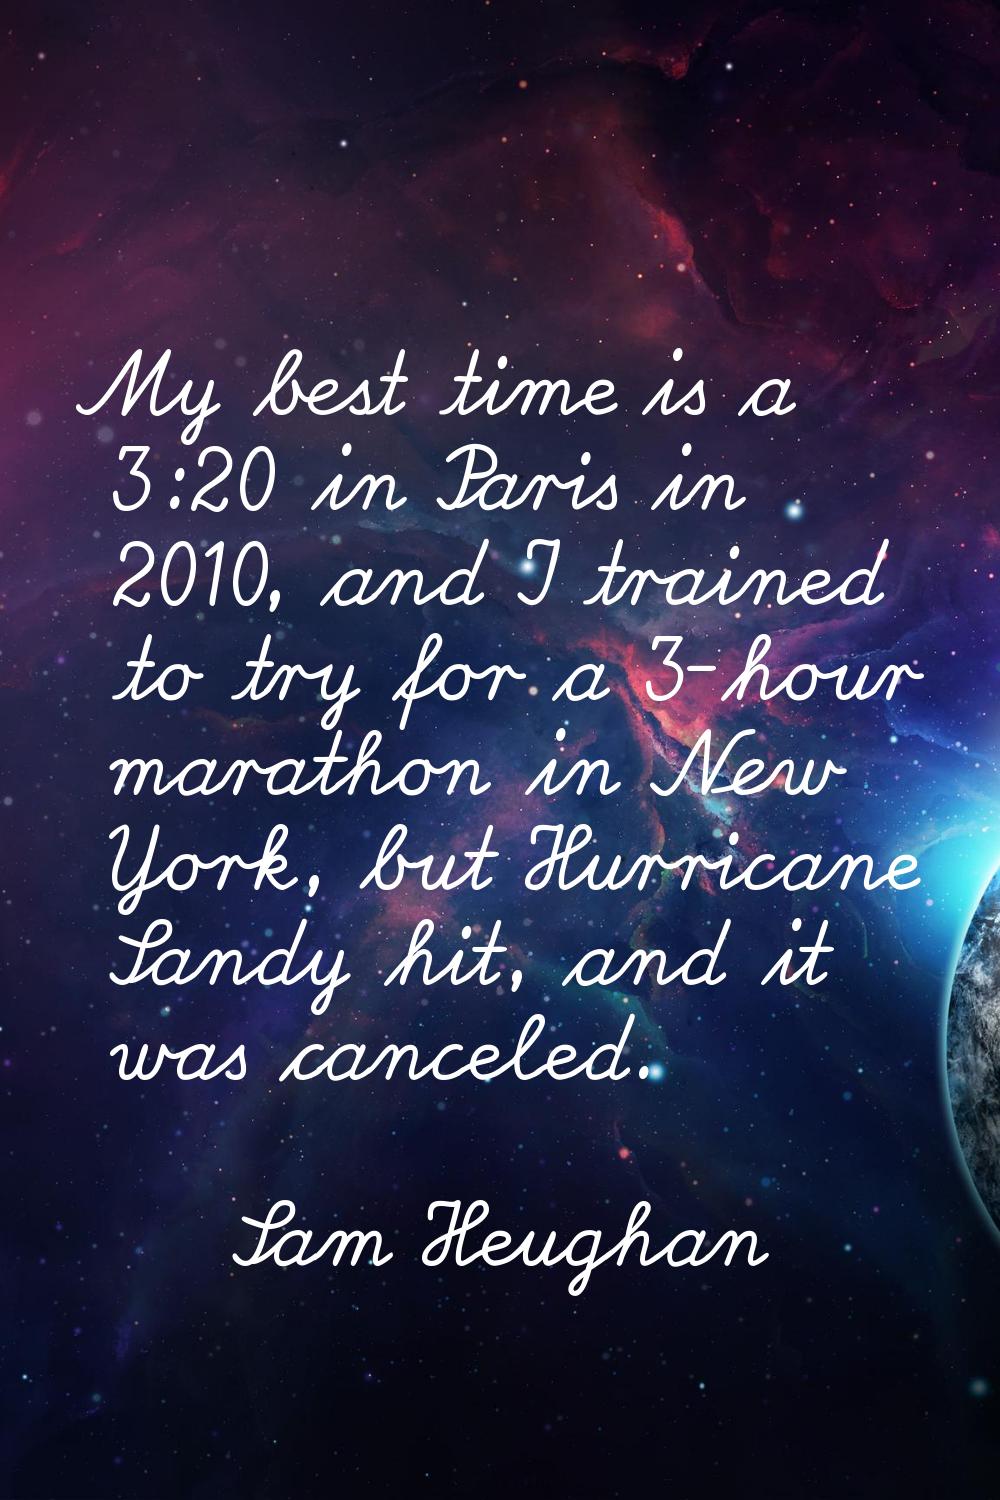 My best time is a 3:20 in Paris in 2010, and I trained to try for a 3-hour marathon in New York, bu